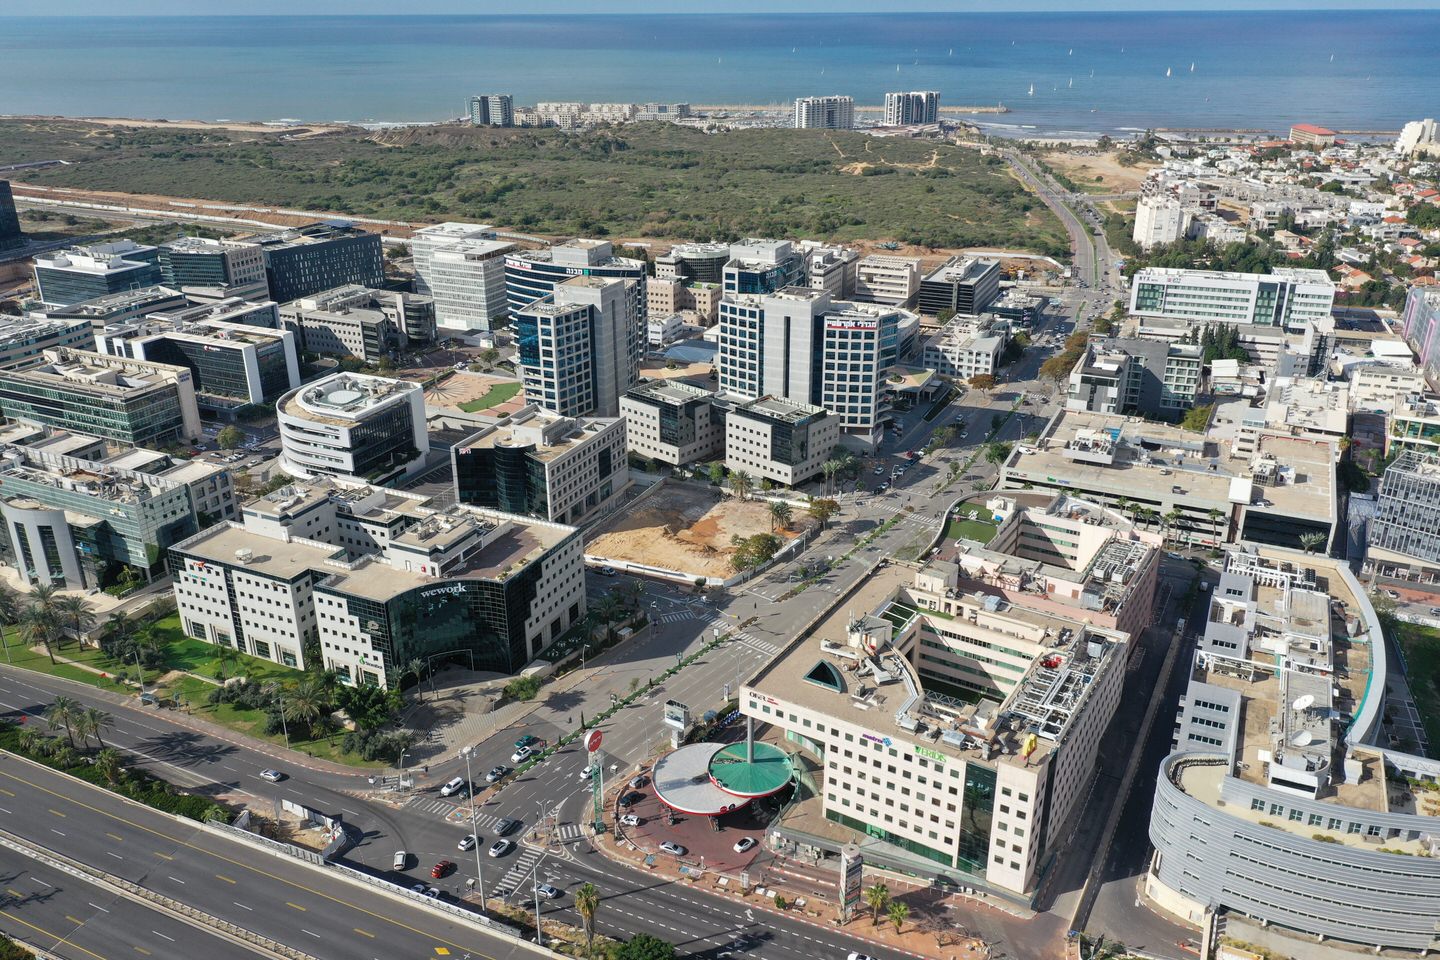 Abba Even: Value-add project for a new mixed-use complex on Abba Eban Blvd in Herzliya | Reality the Leading Group of Real Estate Investment Funds in Israel